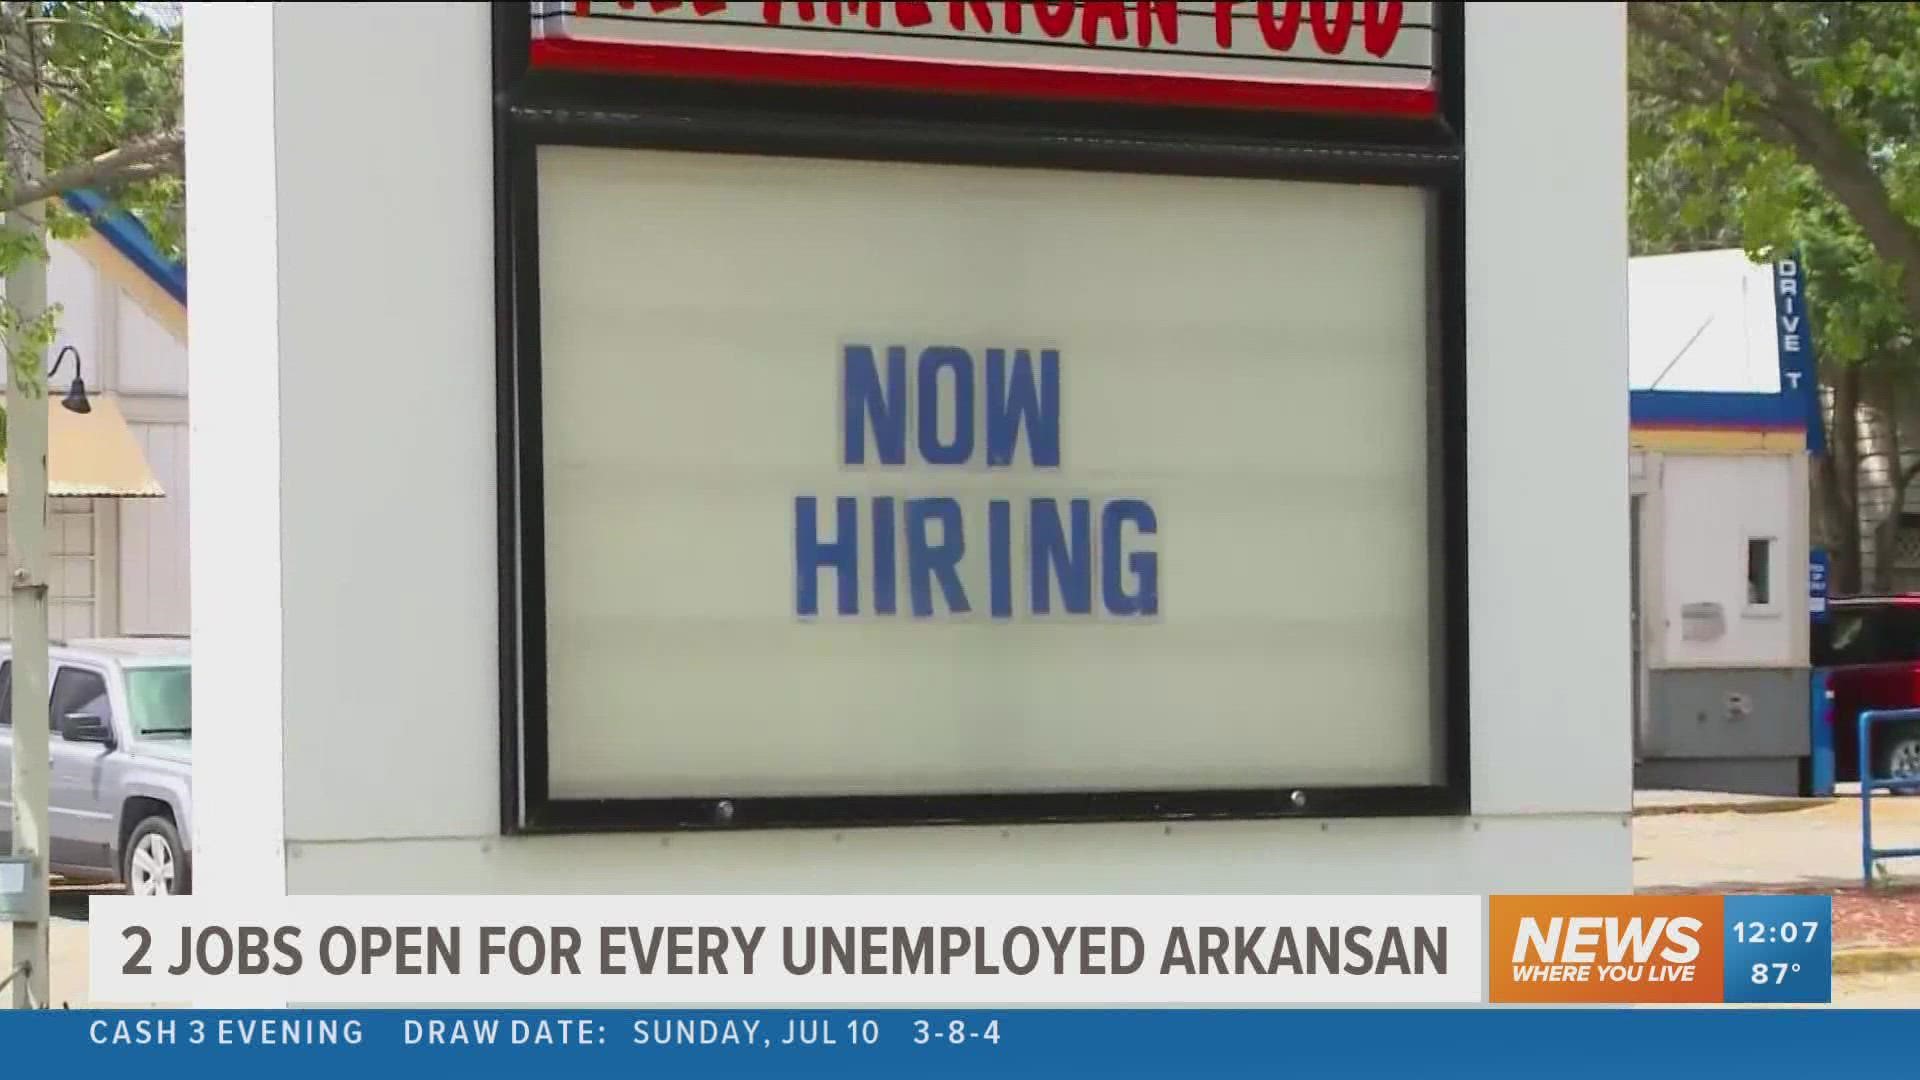 Unemployment is still at a historic low of 3.2% in Arkansas.